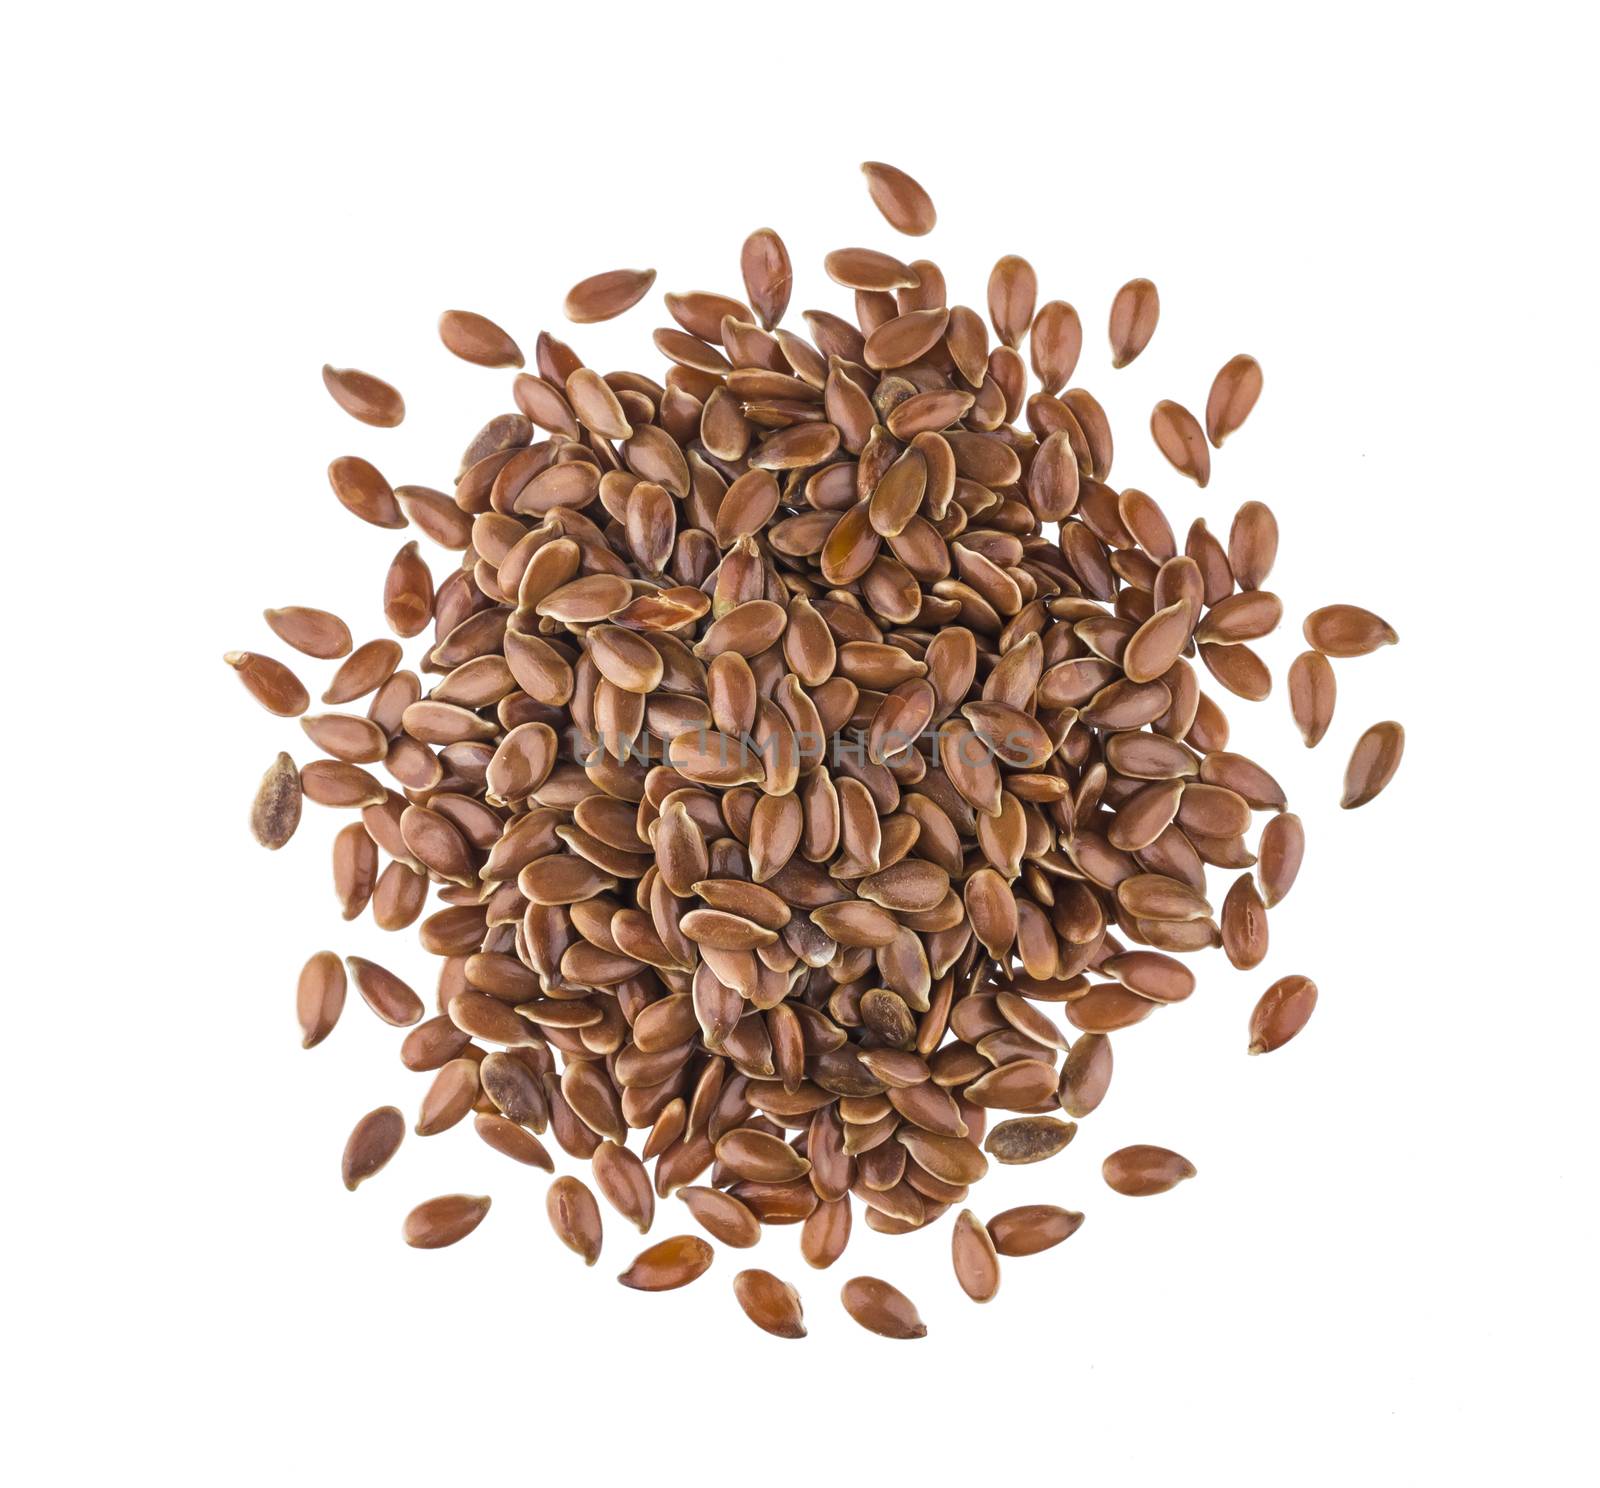 Pile of flax seeds on white background, top view by xamtiw